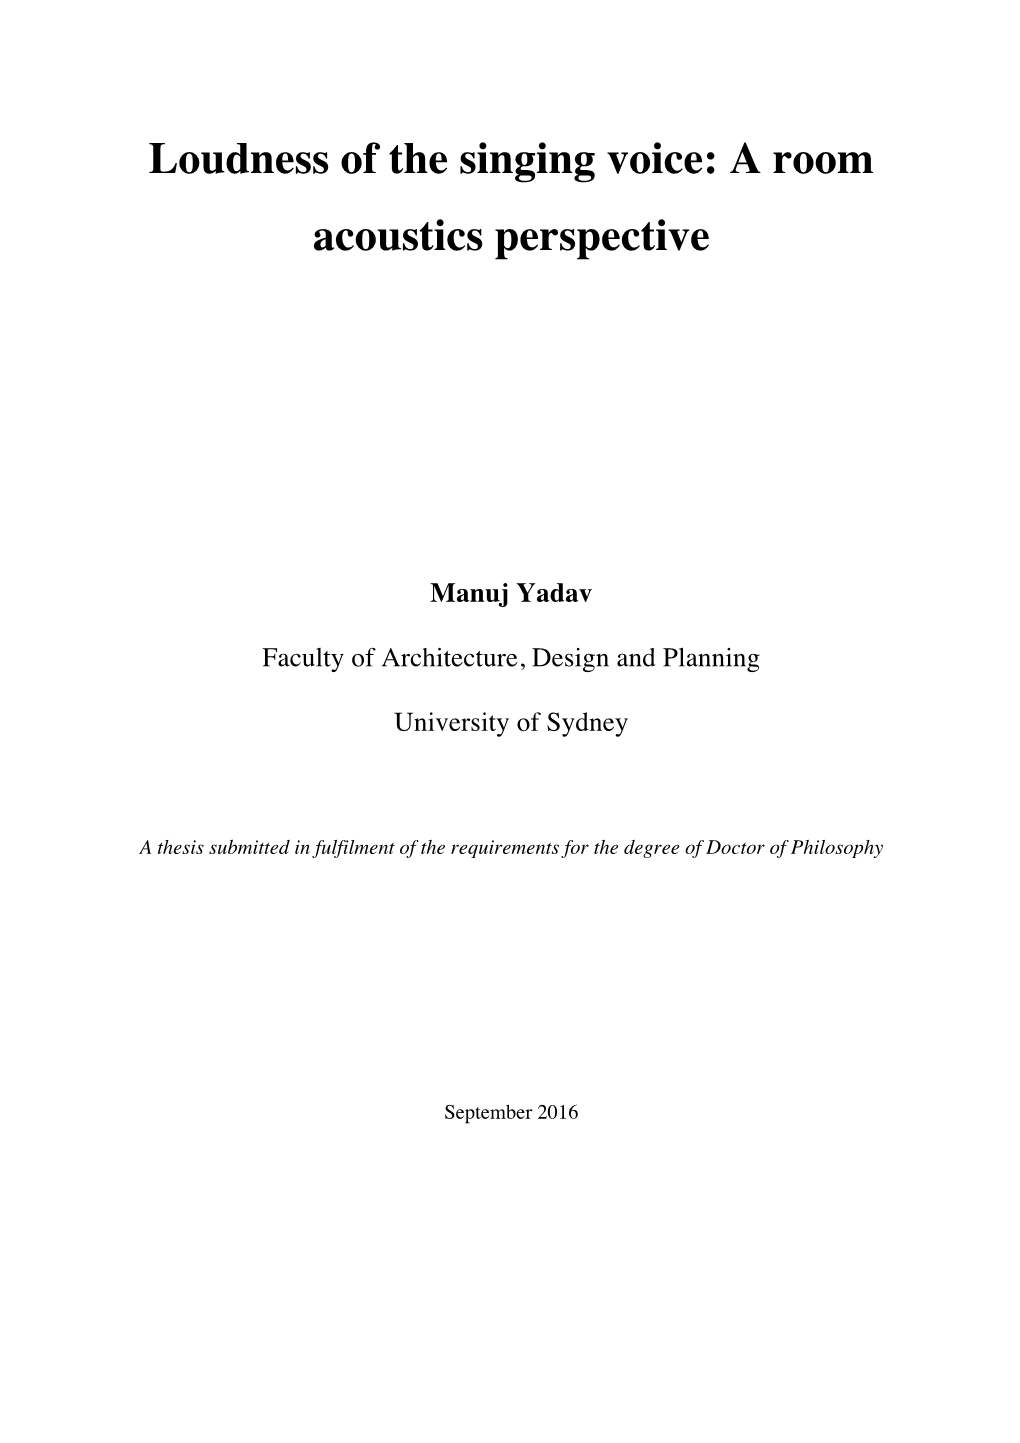 Loudness of the Singing Voice: a Room Acoustics Perspective